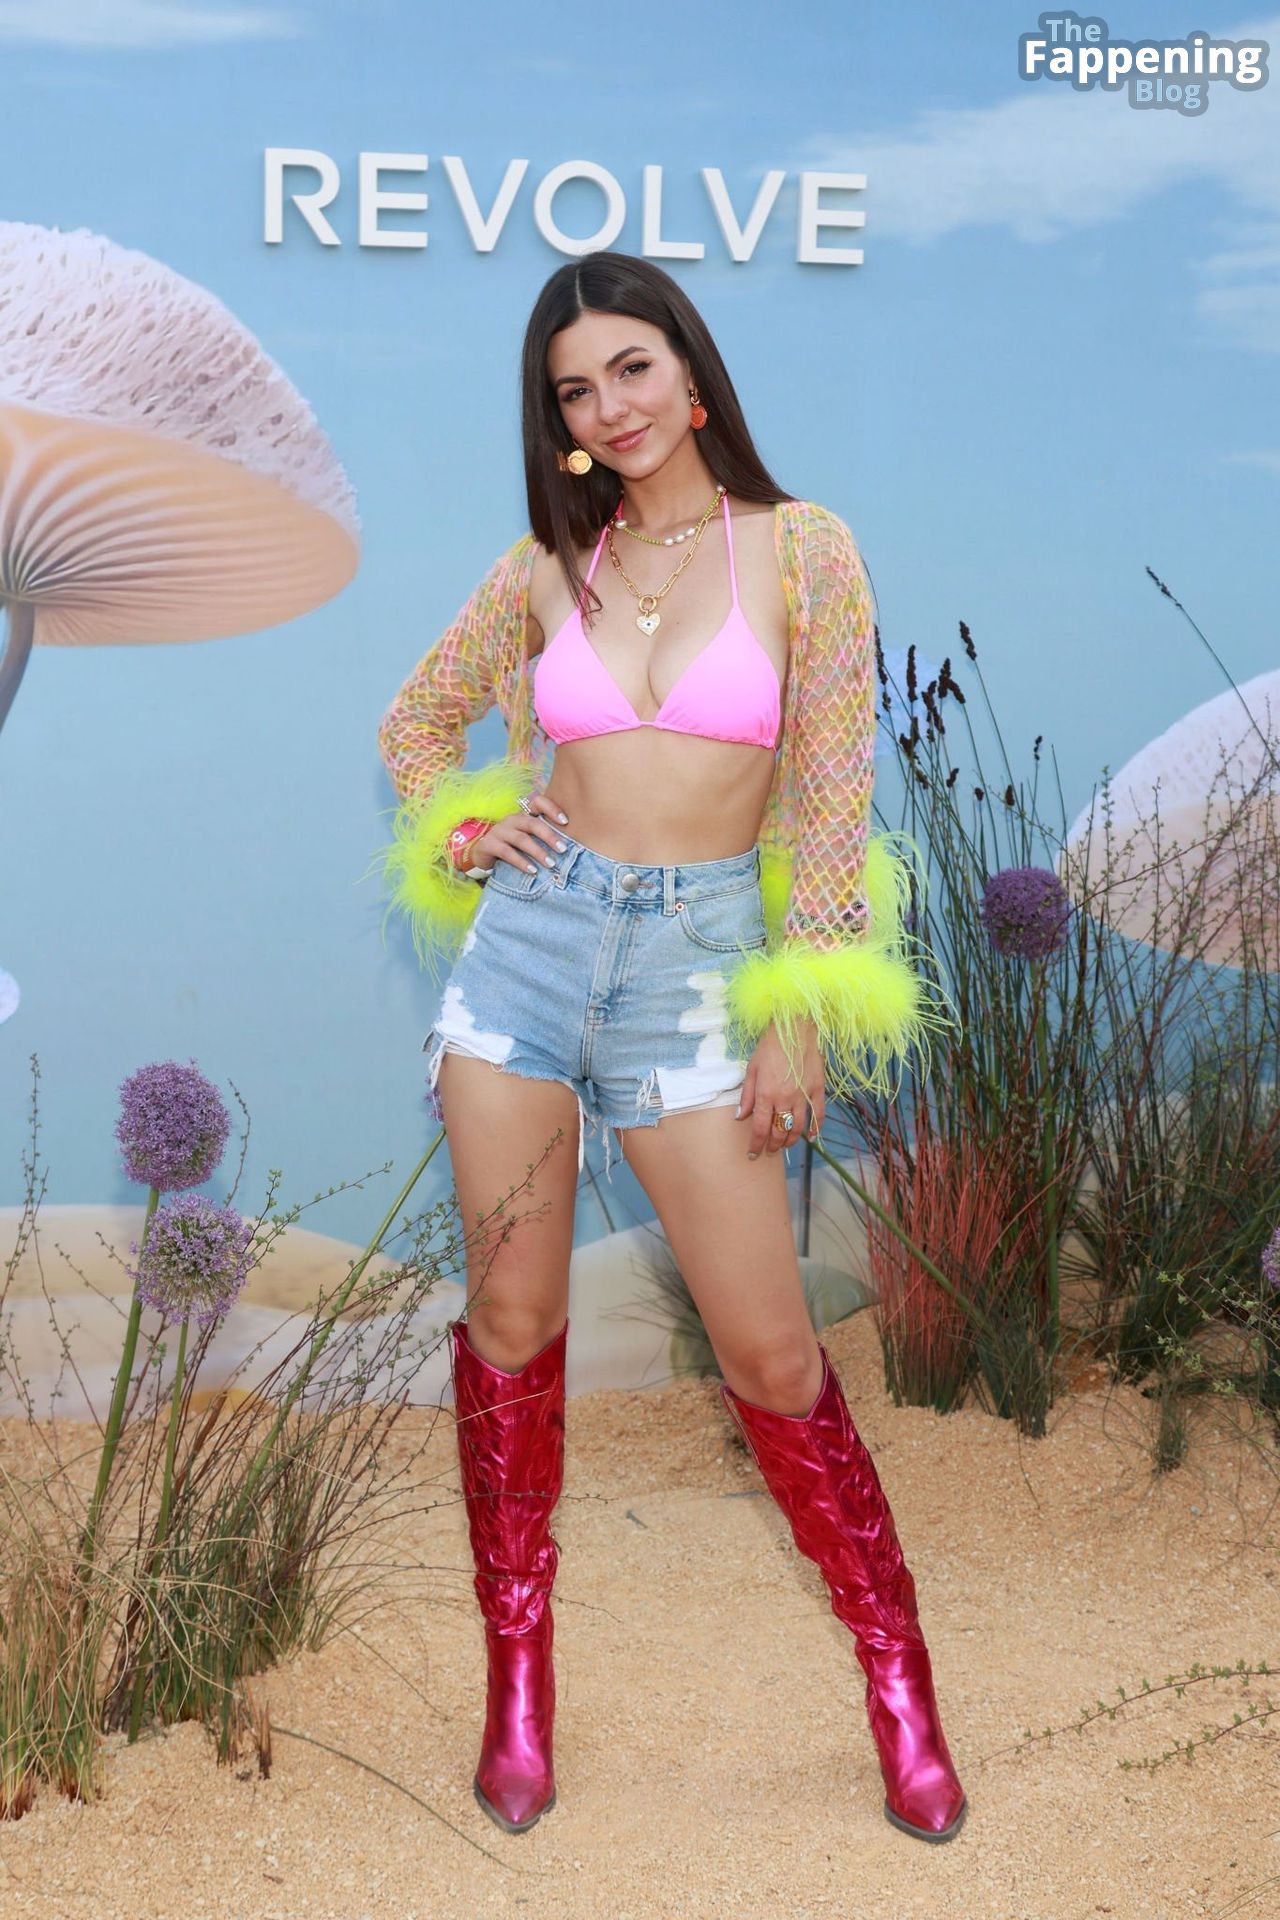 Victoria-Justice-Sexy-The-Fappening-Blog-18.jpg